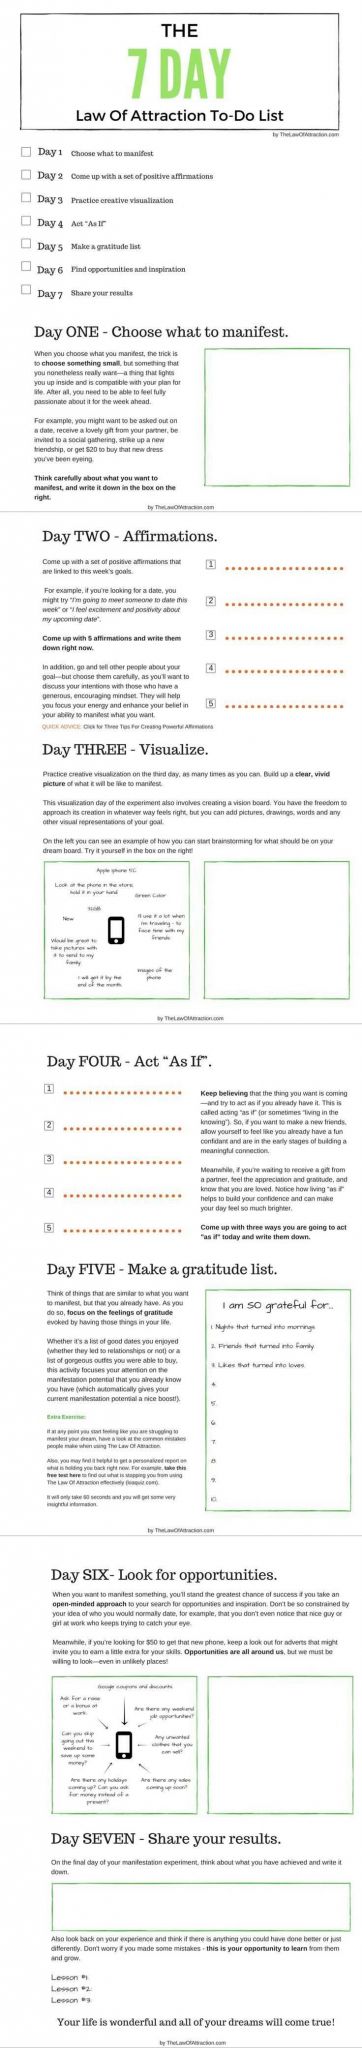 Self forgiveness Worksheet as Well as 703 Best Recovery Images On Pinterest